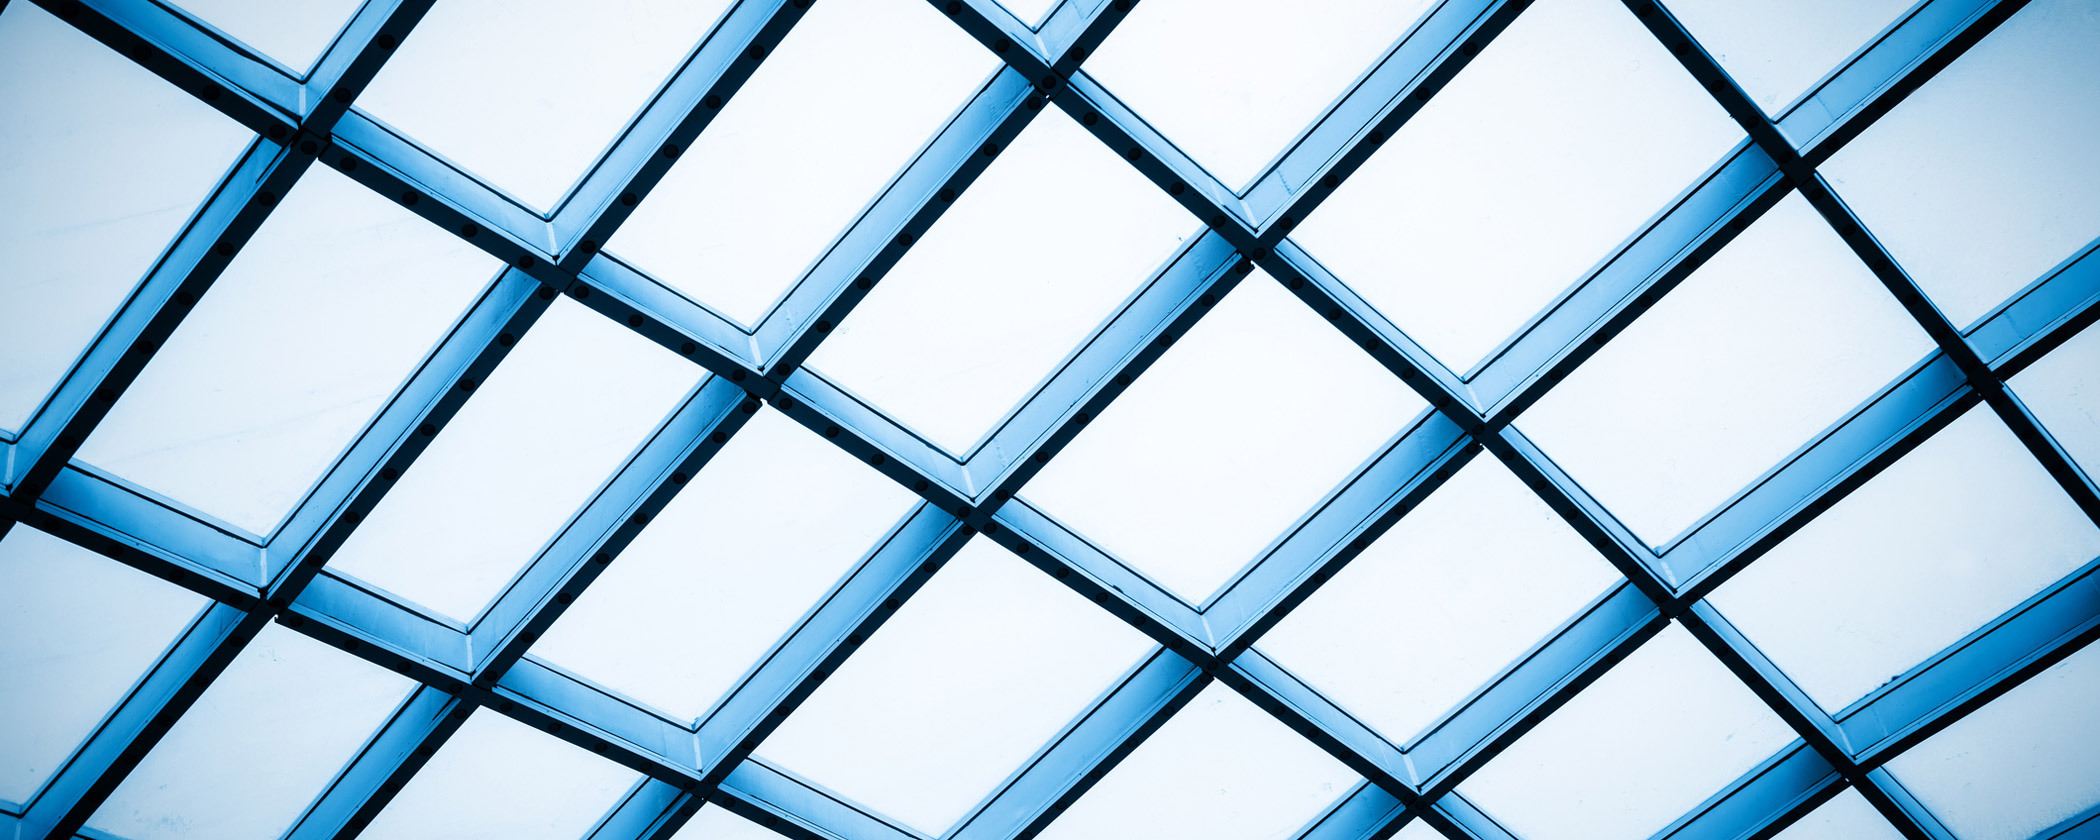 A view of a geometric glass ceiling made up of diamond-shaped panels framed by blue metal supports. The panels are arranged in a grid pattern, allowing light to filter through, creating a bright and airy atmosphere.